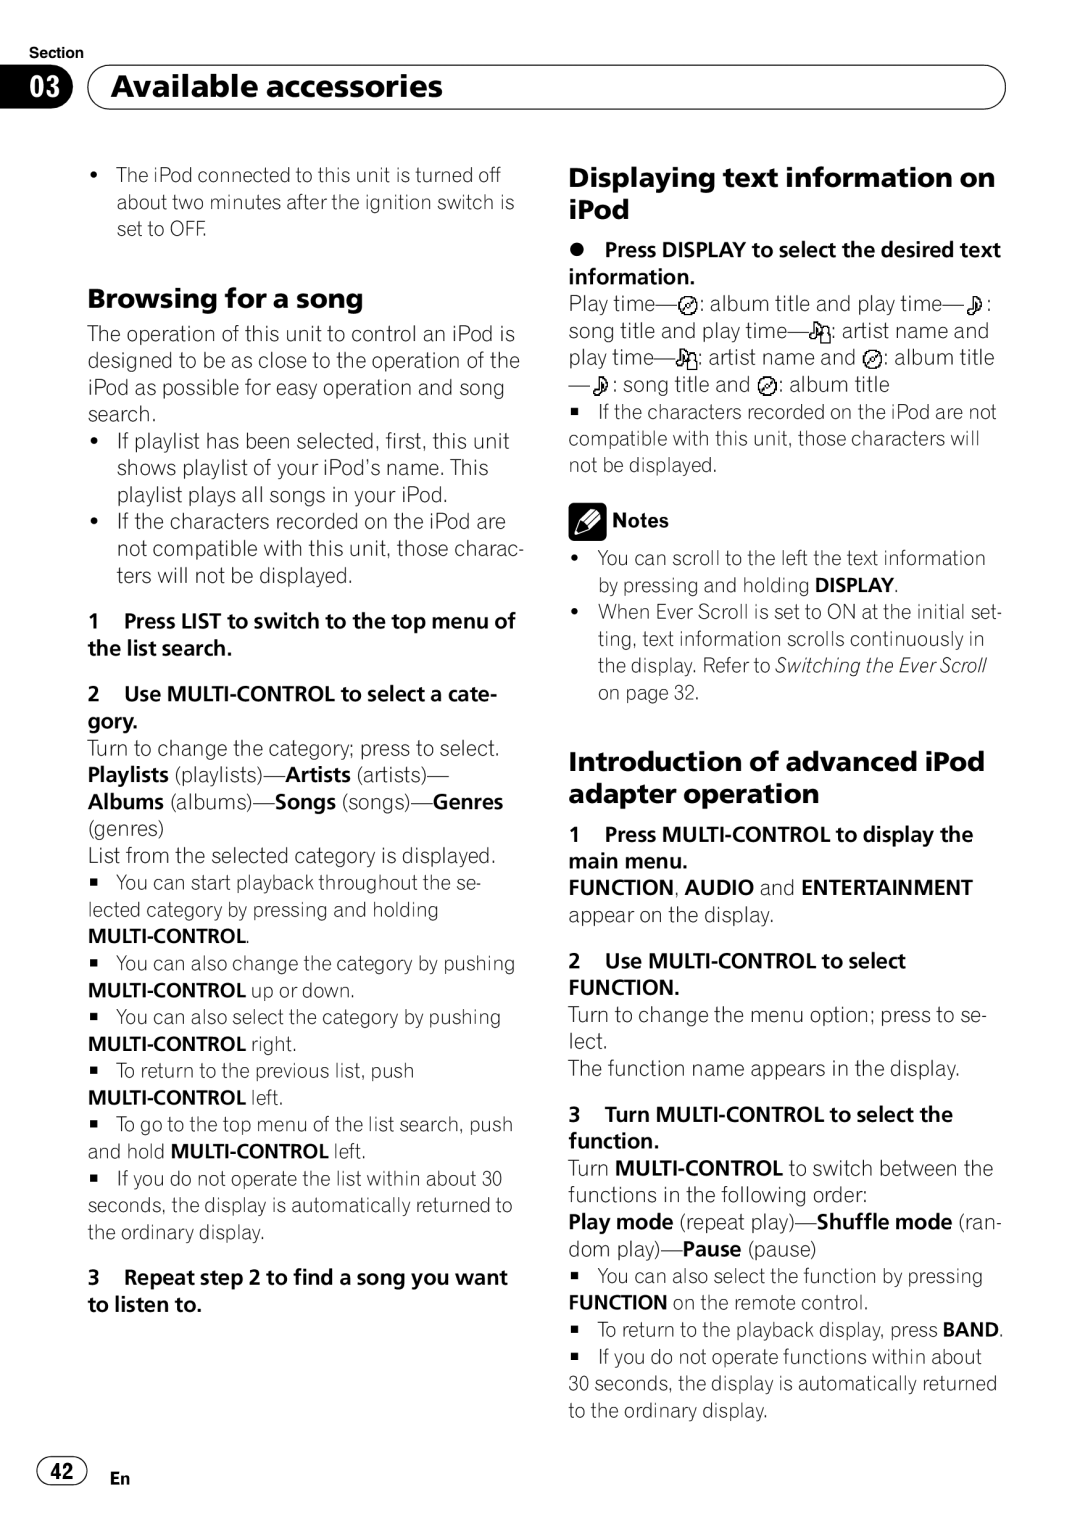 Pioneer DEH-P690UB Introduction of advanced iPod adapter operation, 03Available accessories, Browsing for a song 